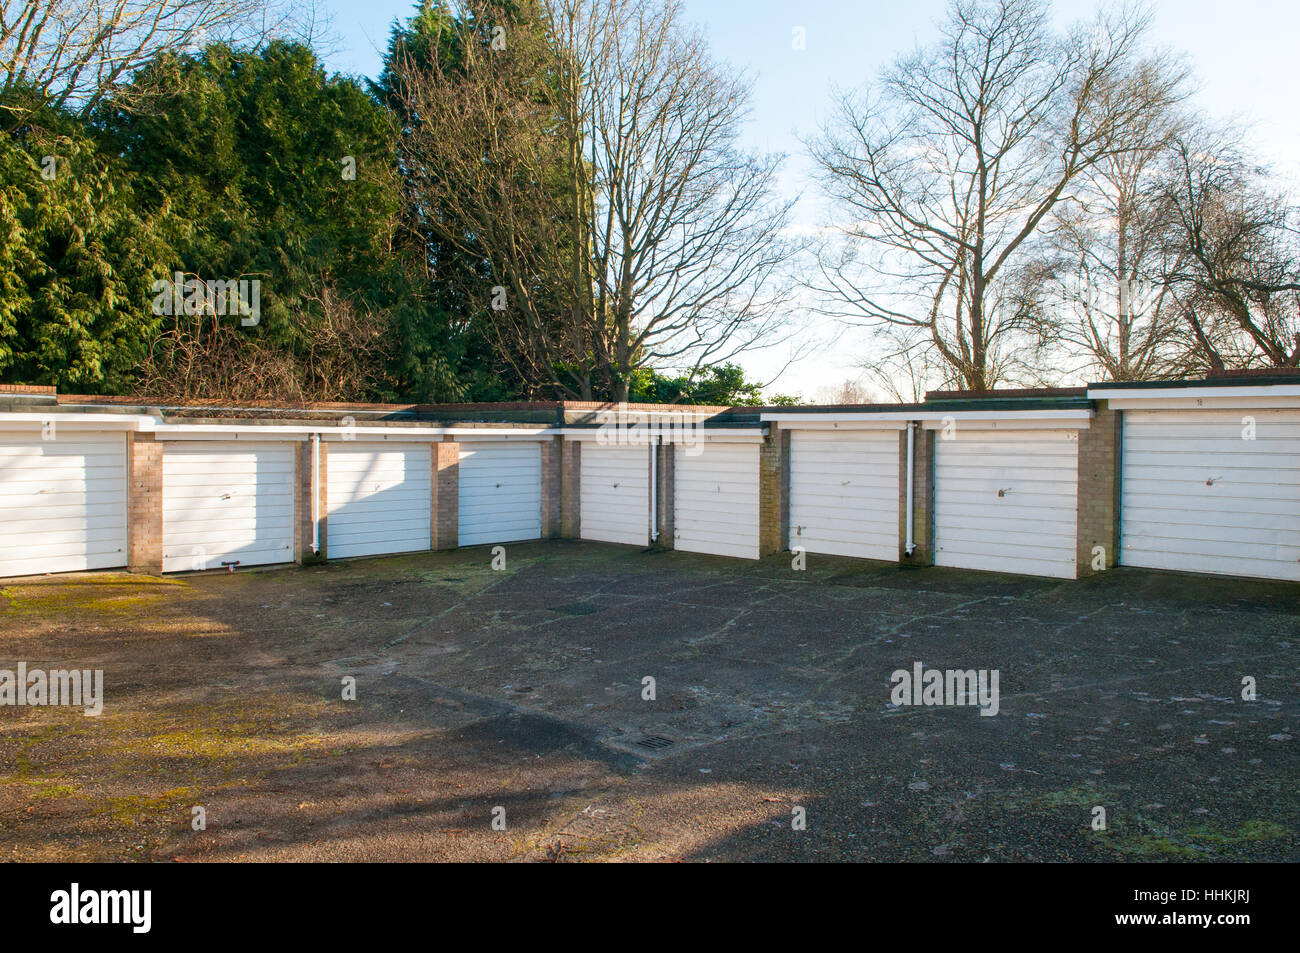 Garages in a residential area Stock Photo